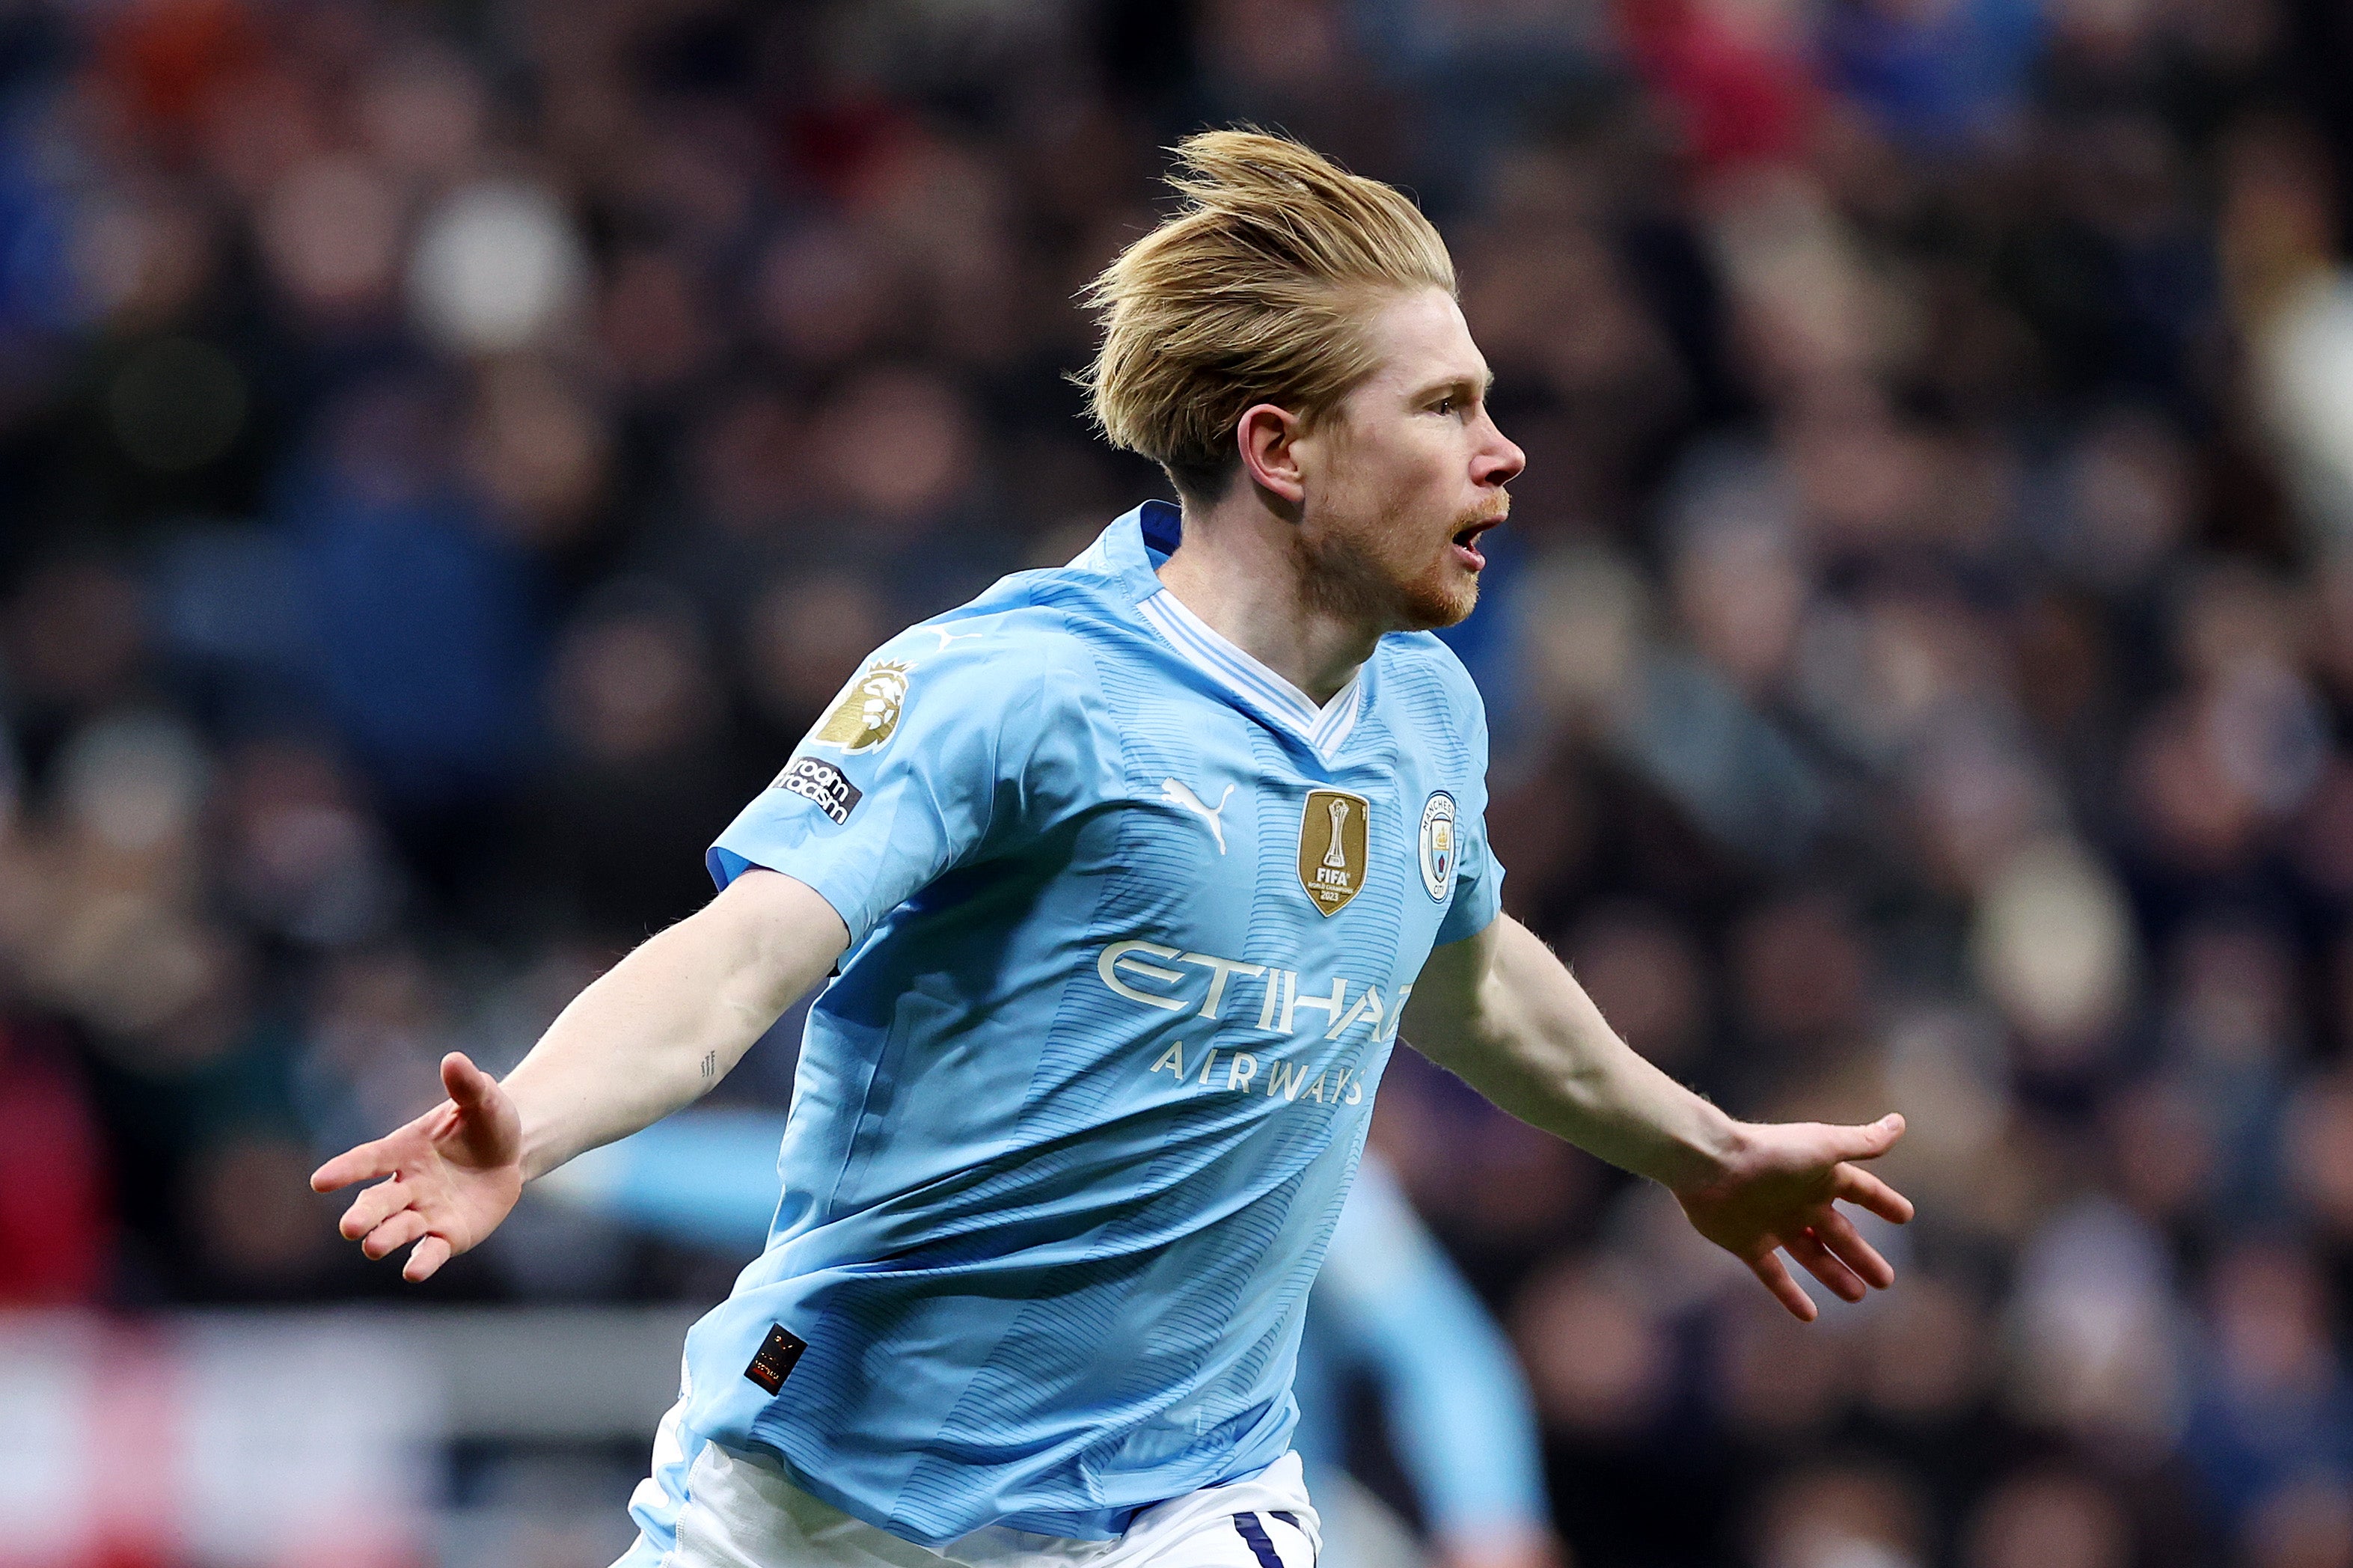 Kevin De Bruyne sparked Man City to life and to the three points